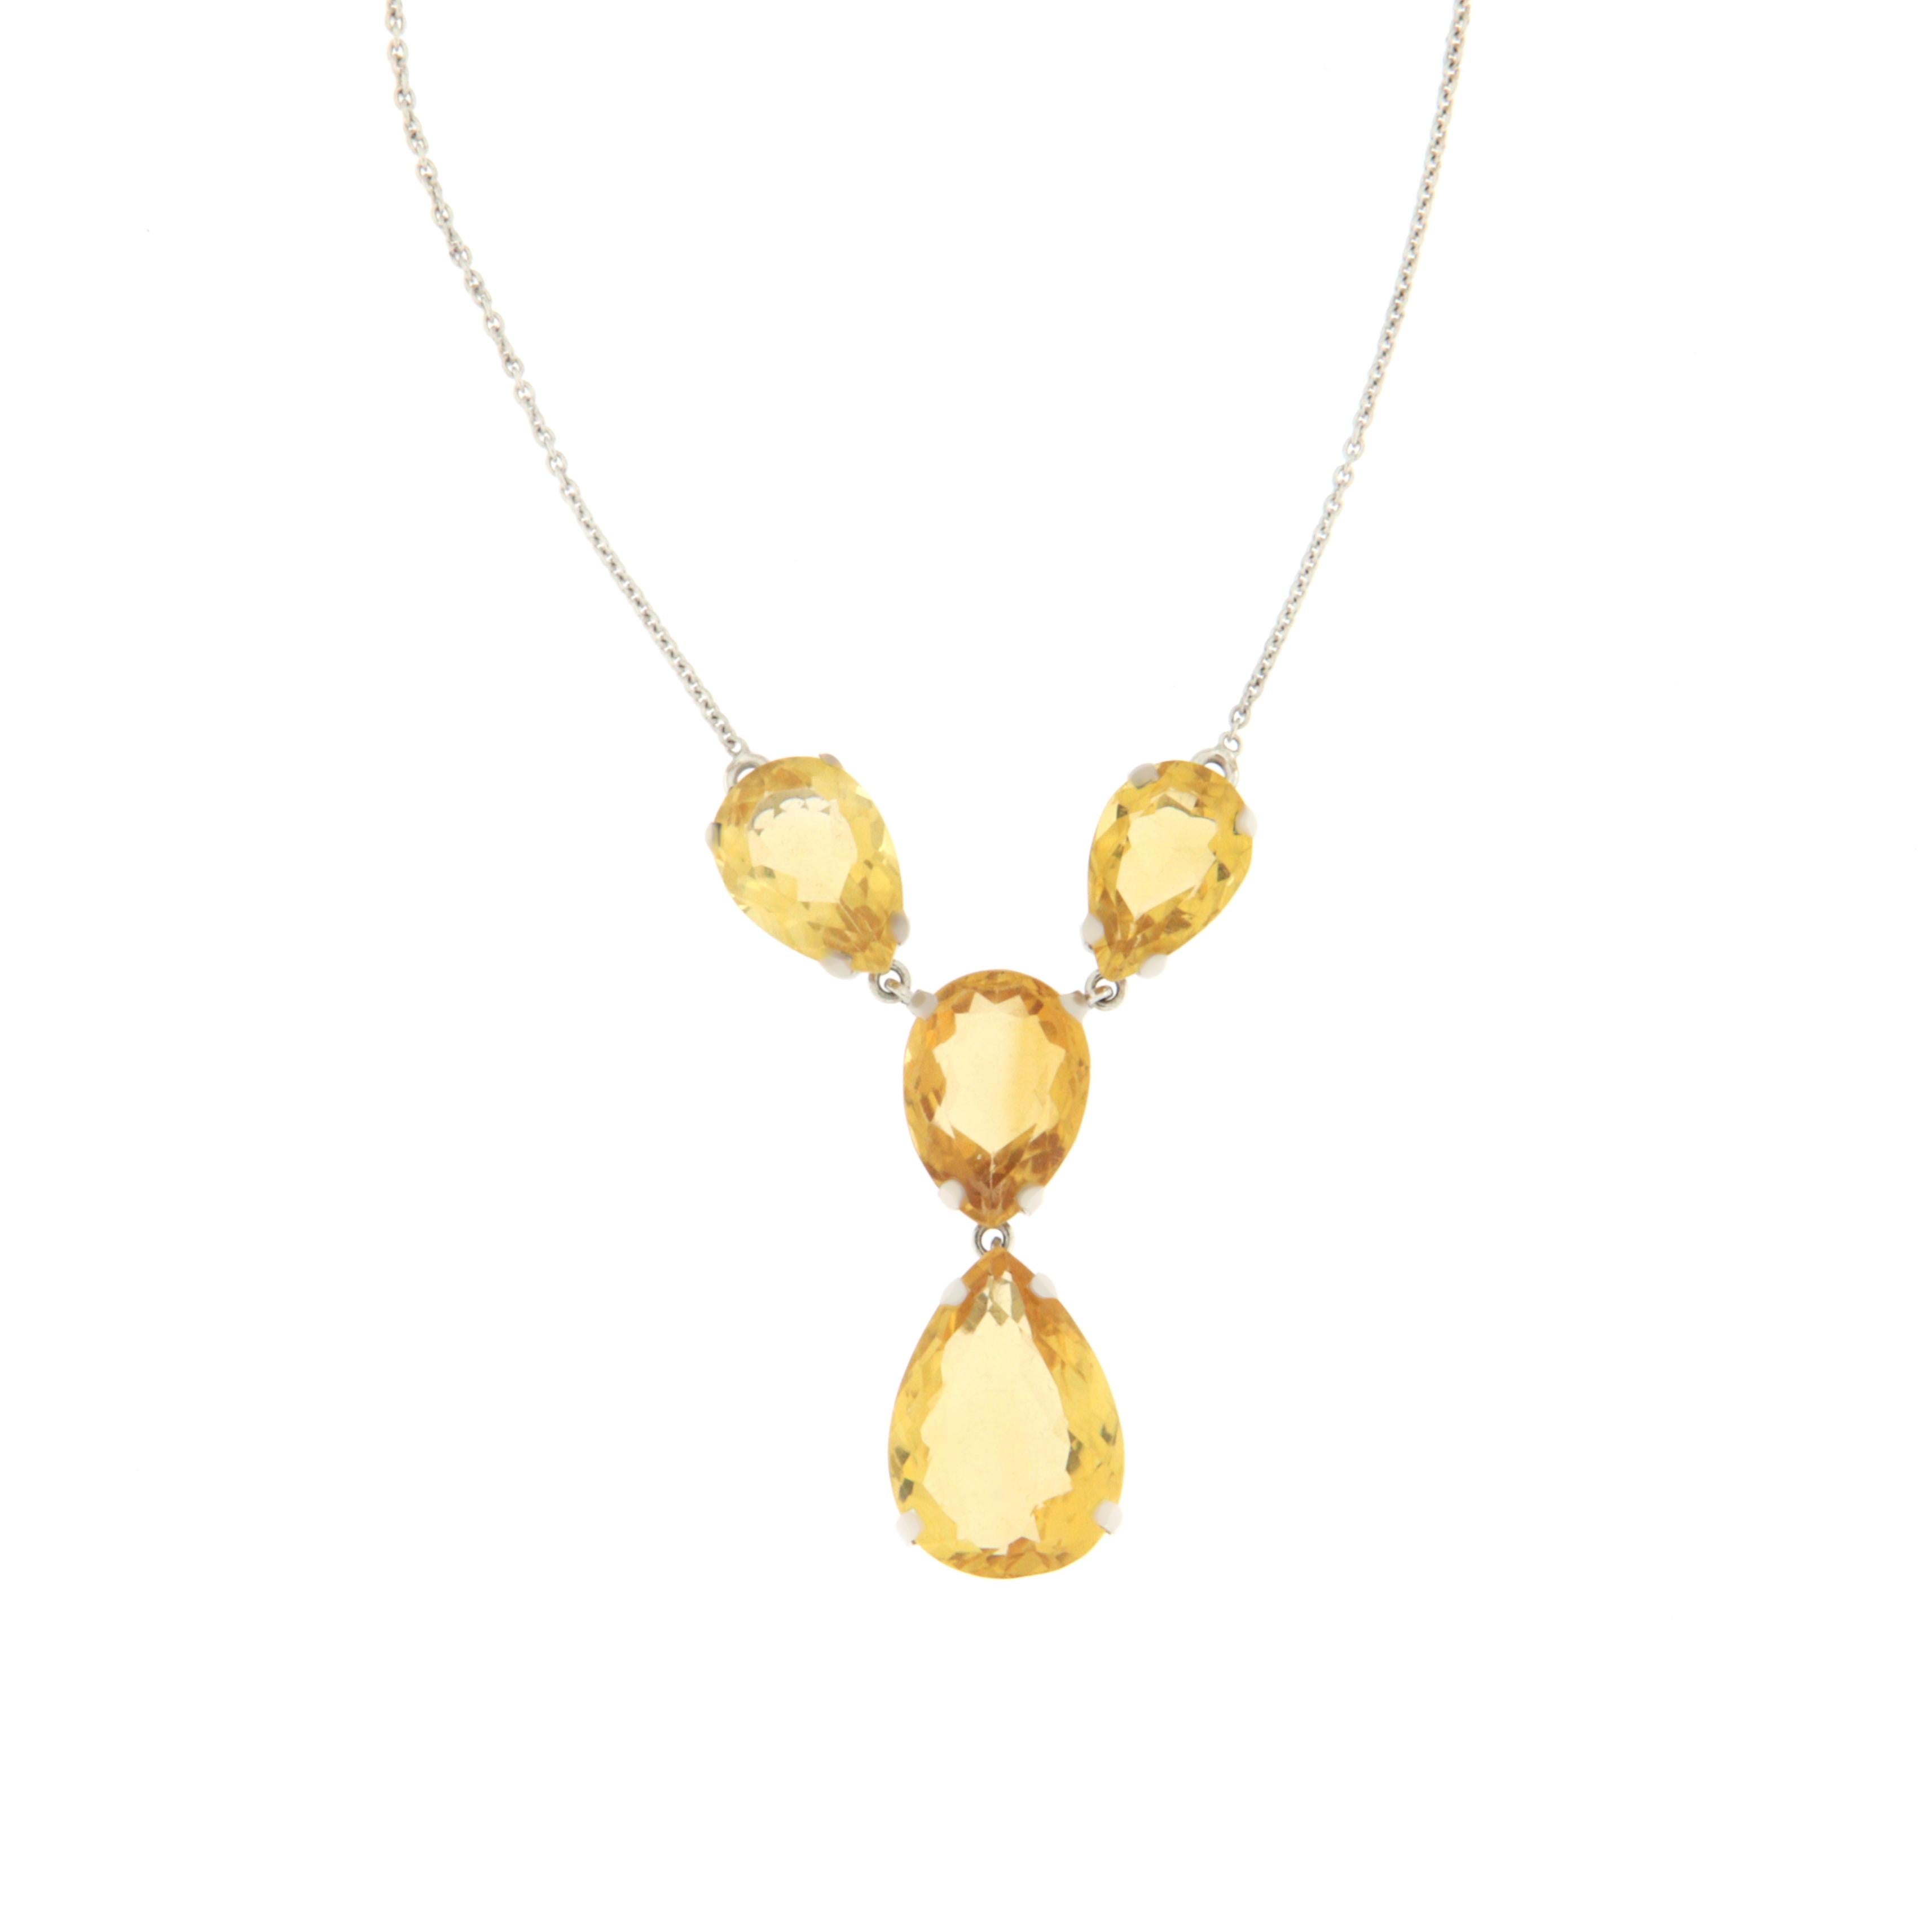 Handcraft Citrine 18 Karat White Gold Pendant Necklace In New Condition For Sale In Marcianise, IT